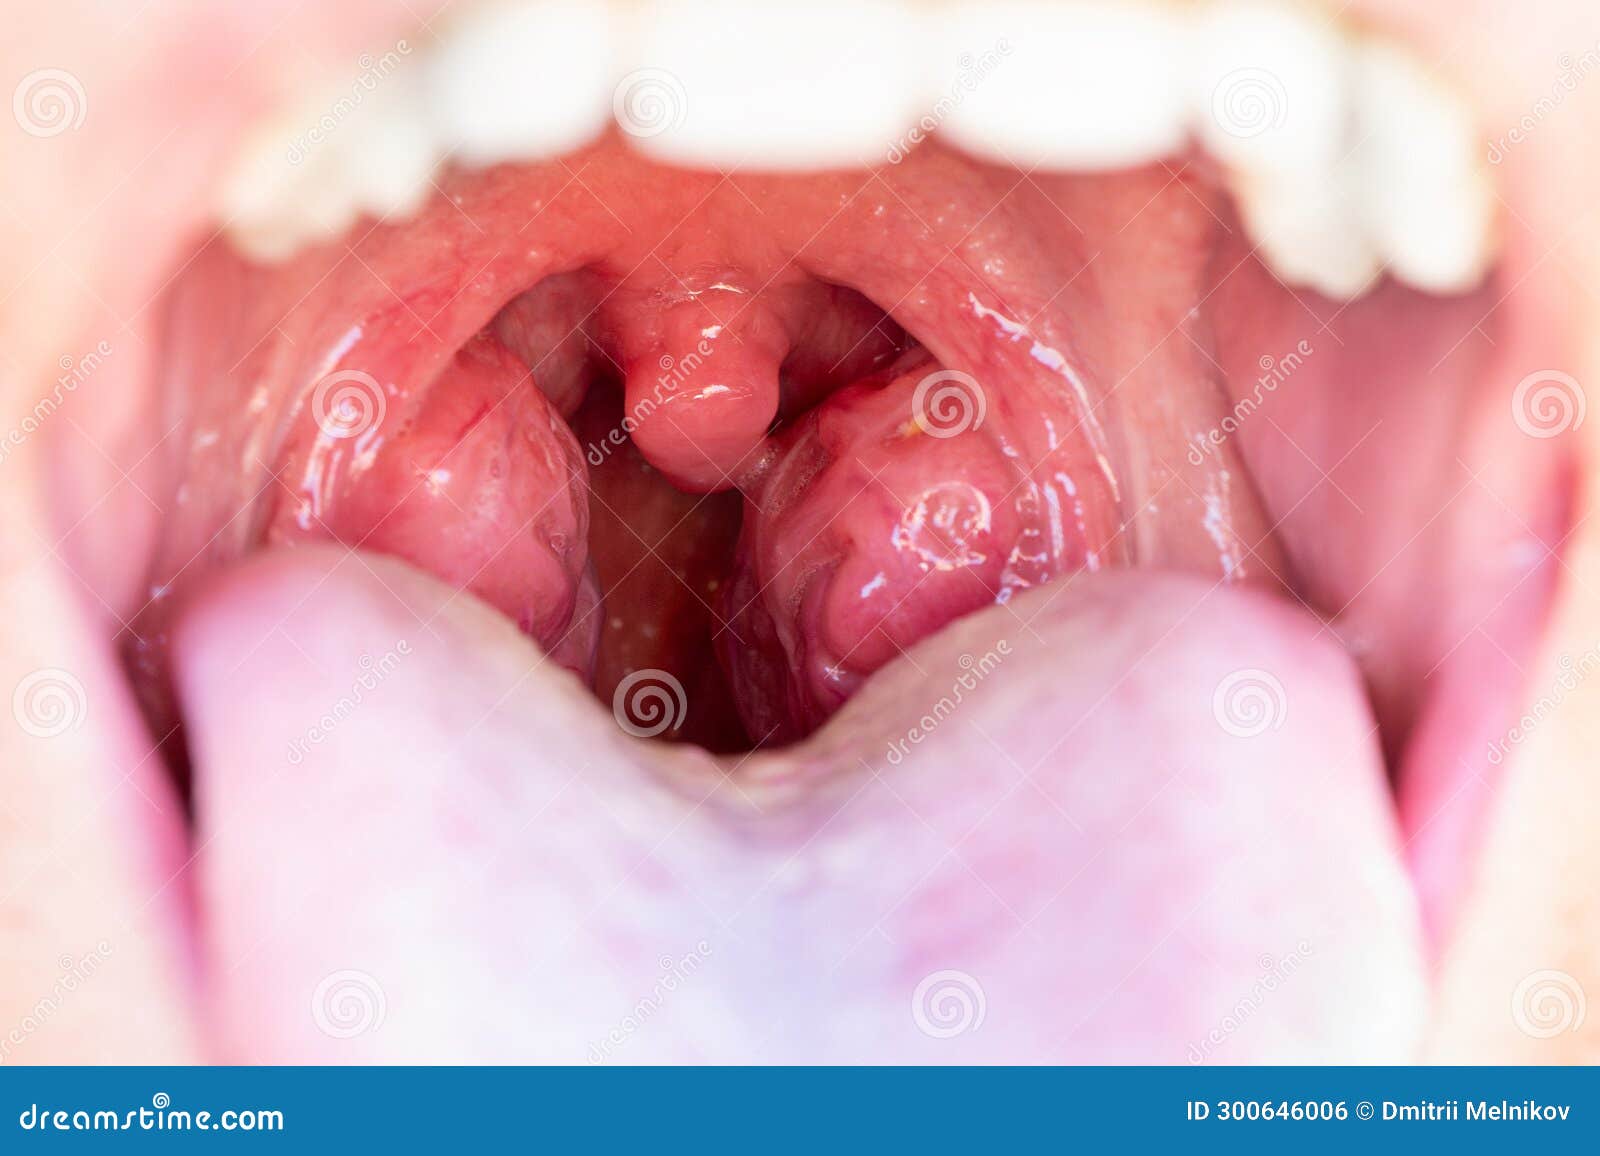 the child is a patient with large red glands. tonsils in close-up in the mouth.